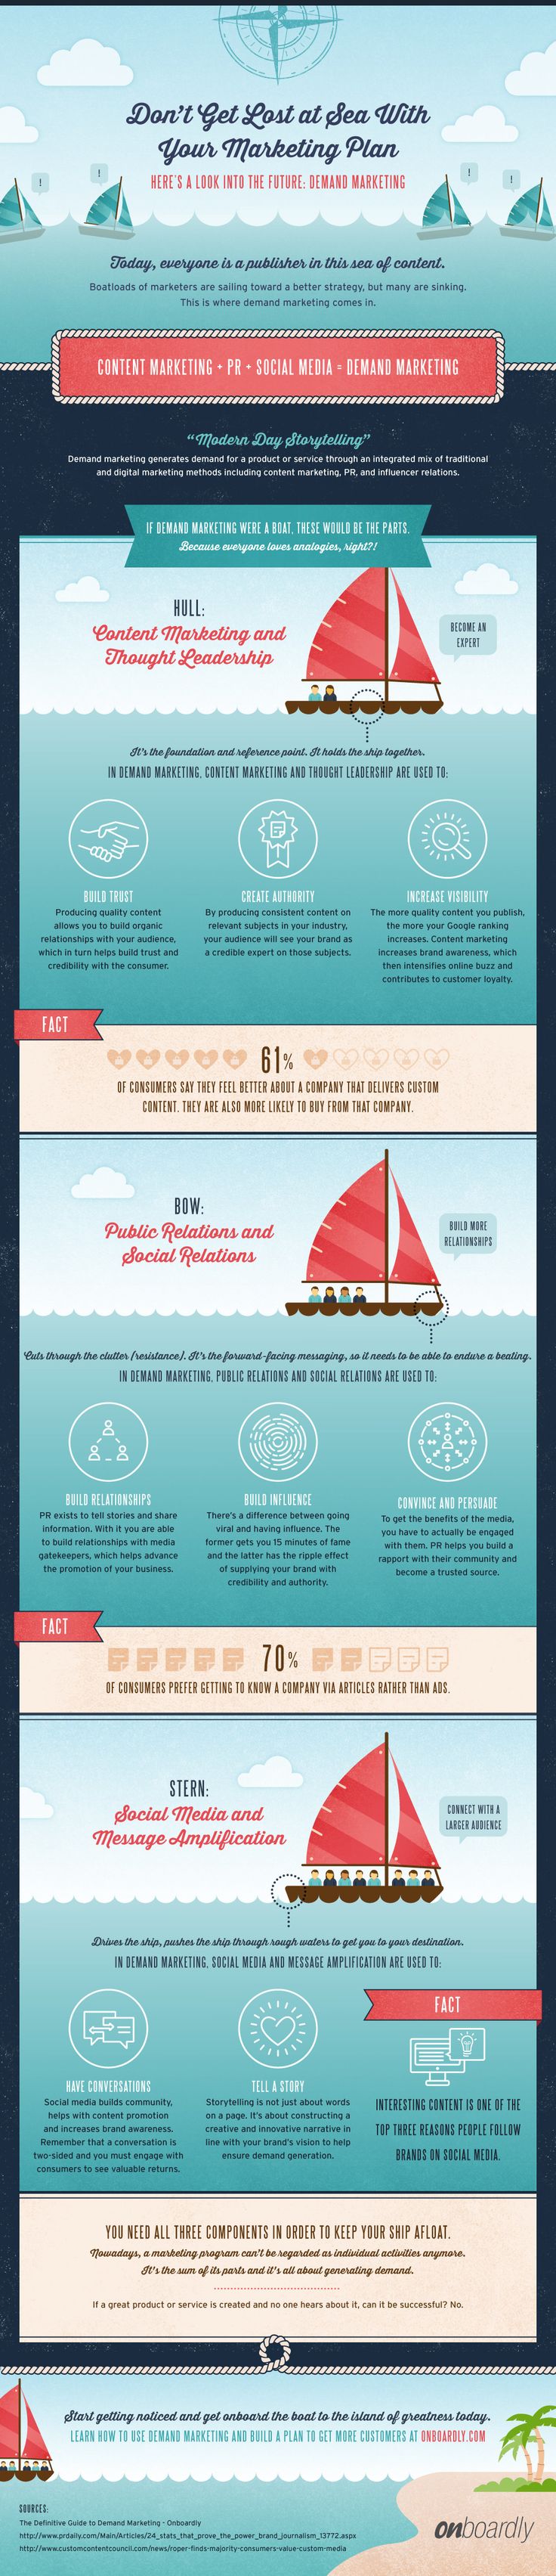 Digital-Marketing-Dont-Get-Lost-at-Sea-With-Your-Marketing-Plan-infographic-Marketing Digital Marketing : Don't Get Lost at Sea With Your Marketing Plan #infographic #Marketing